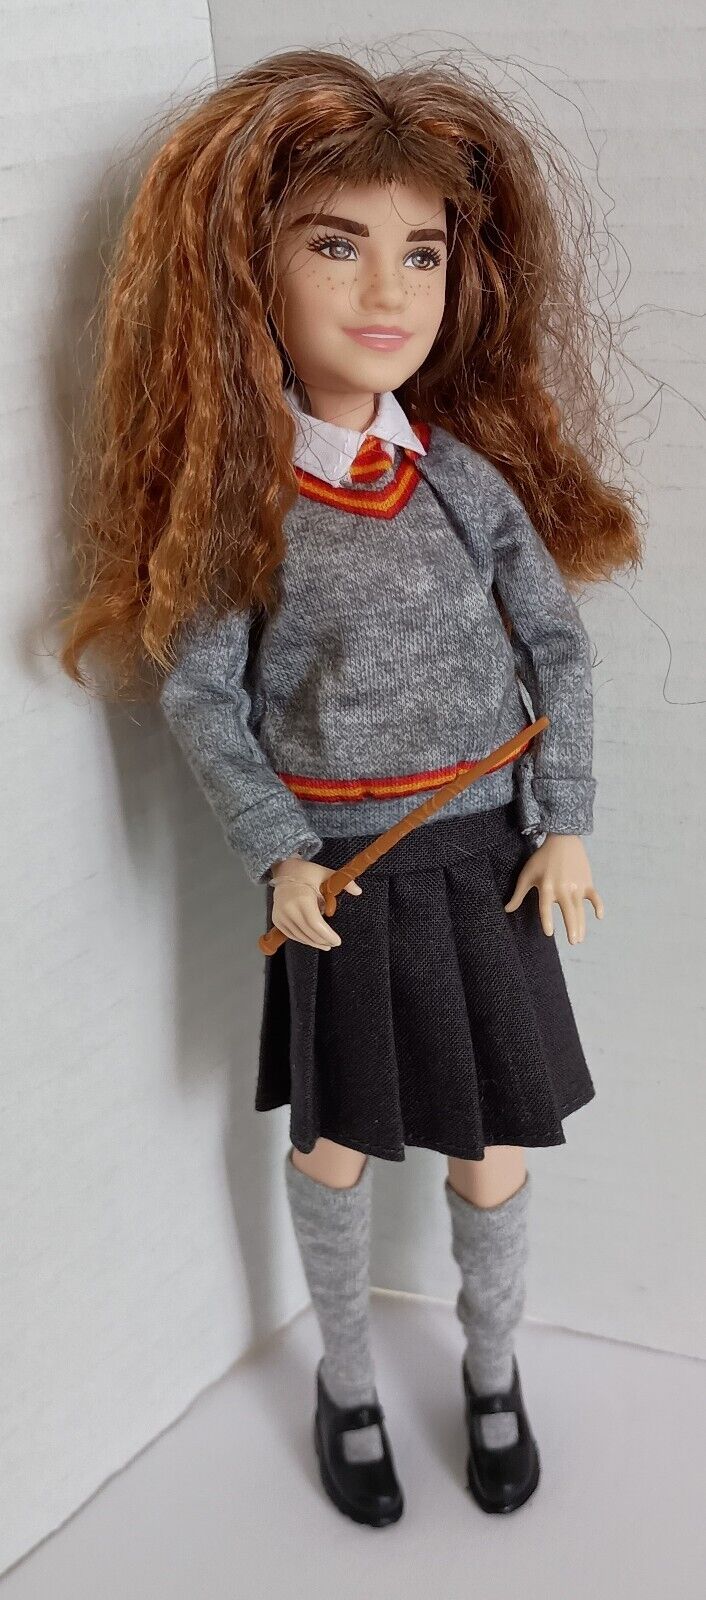 Harry Potter Barbie Doll Hermione Granger Mattel 2018 With Wand And Shoes 